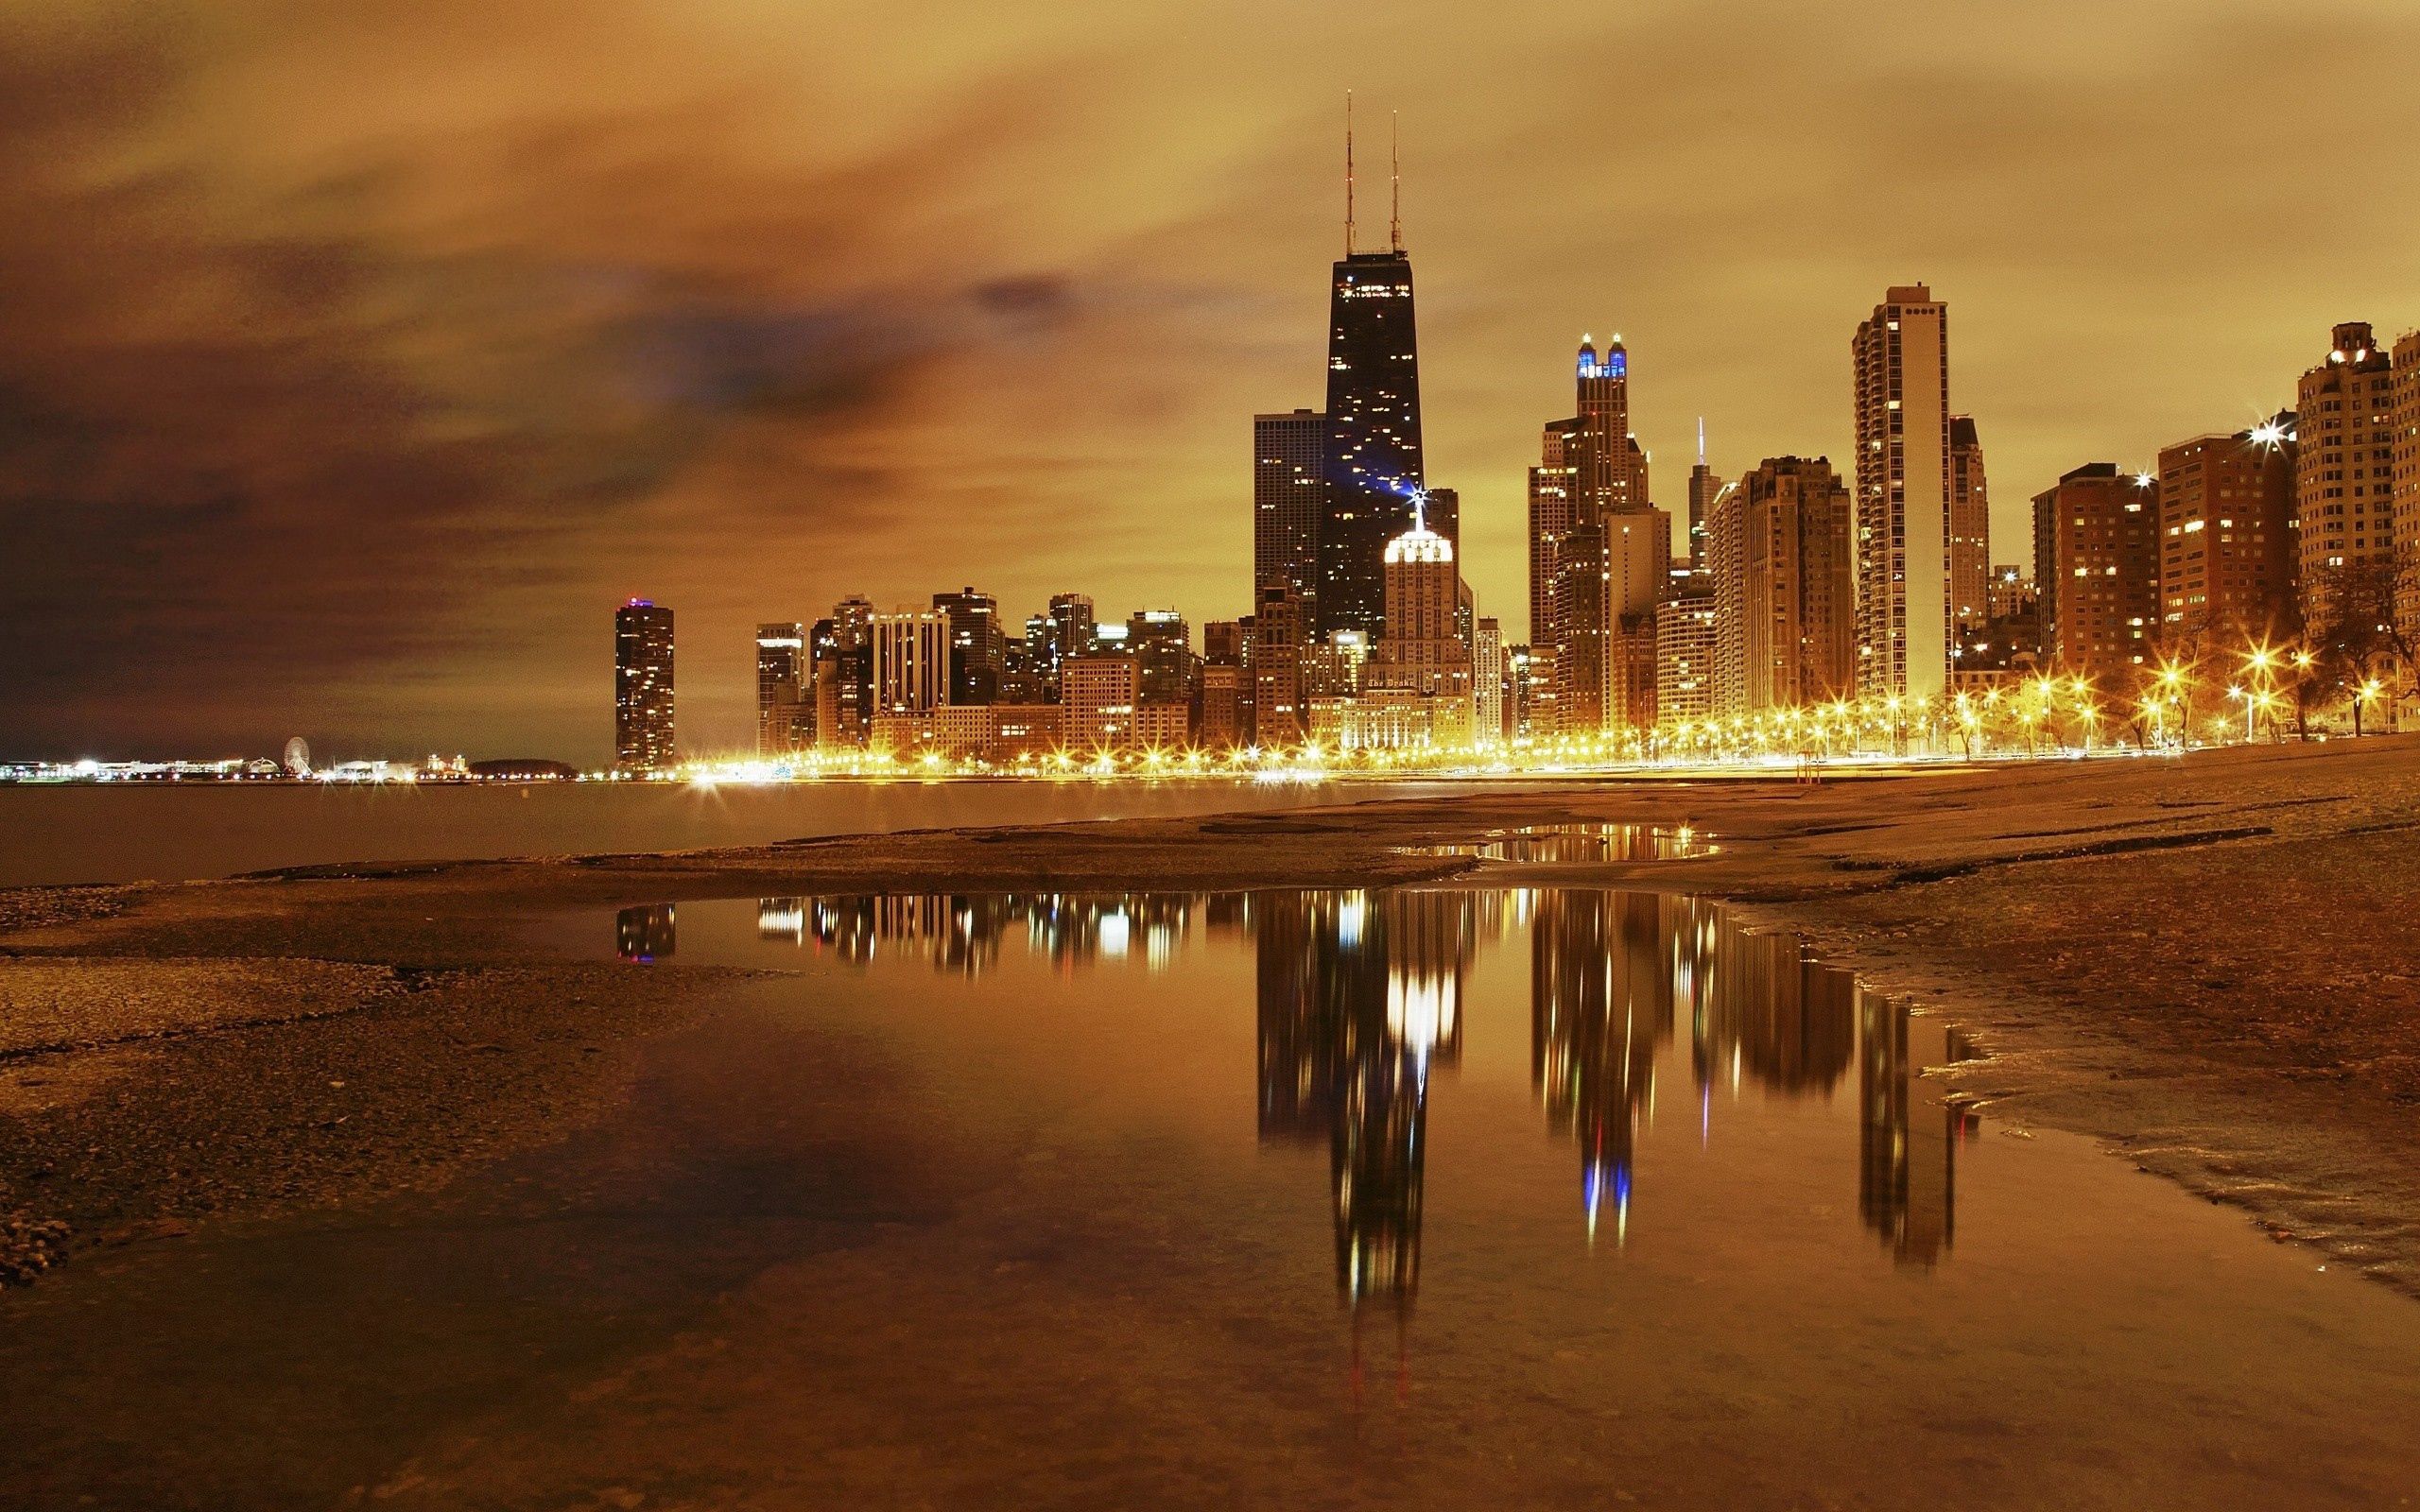 city lights, cities, beach, building, skyscrapers, evening, hdr, chicago